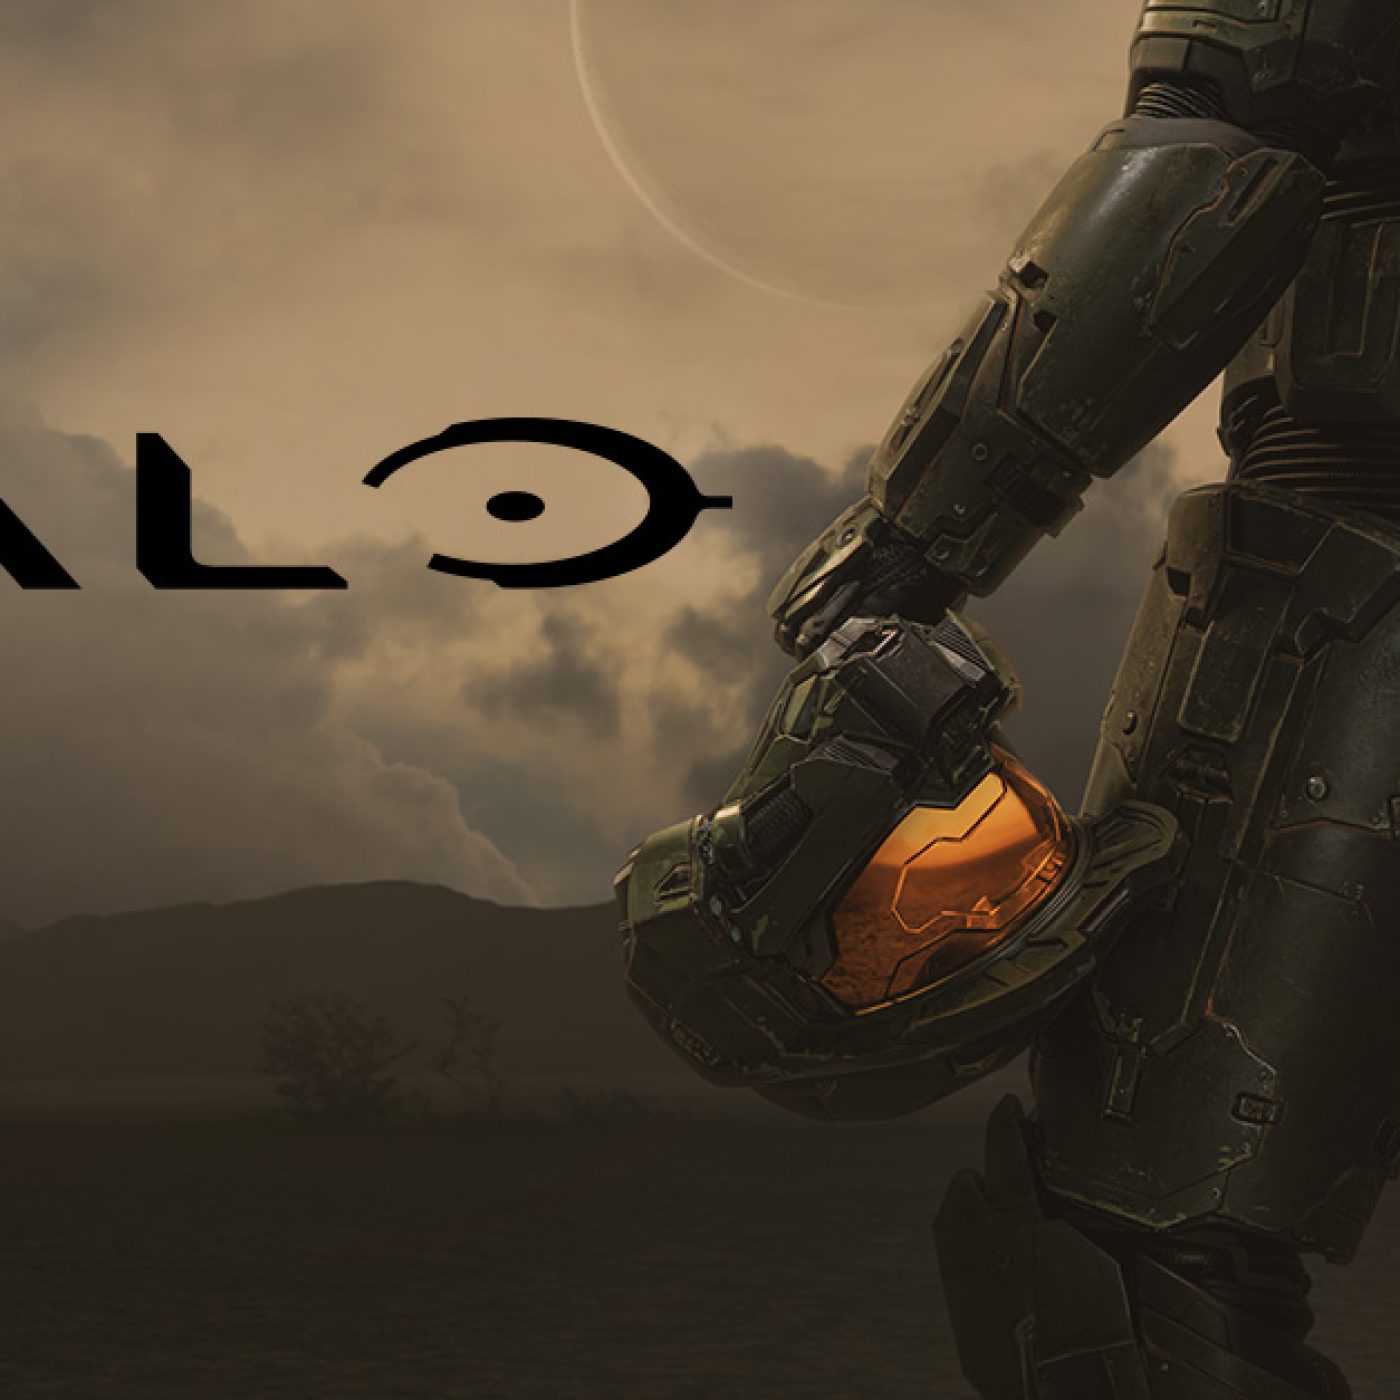 The official HALO season 2 trailer takes us into The Fall of Reach